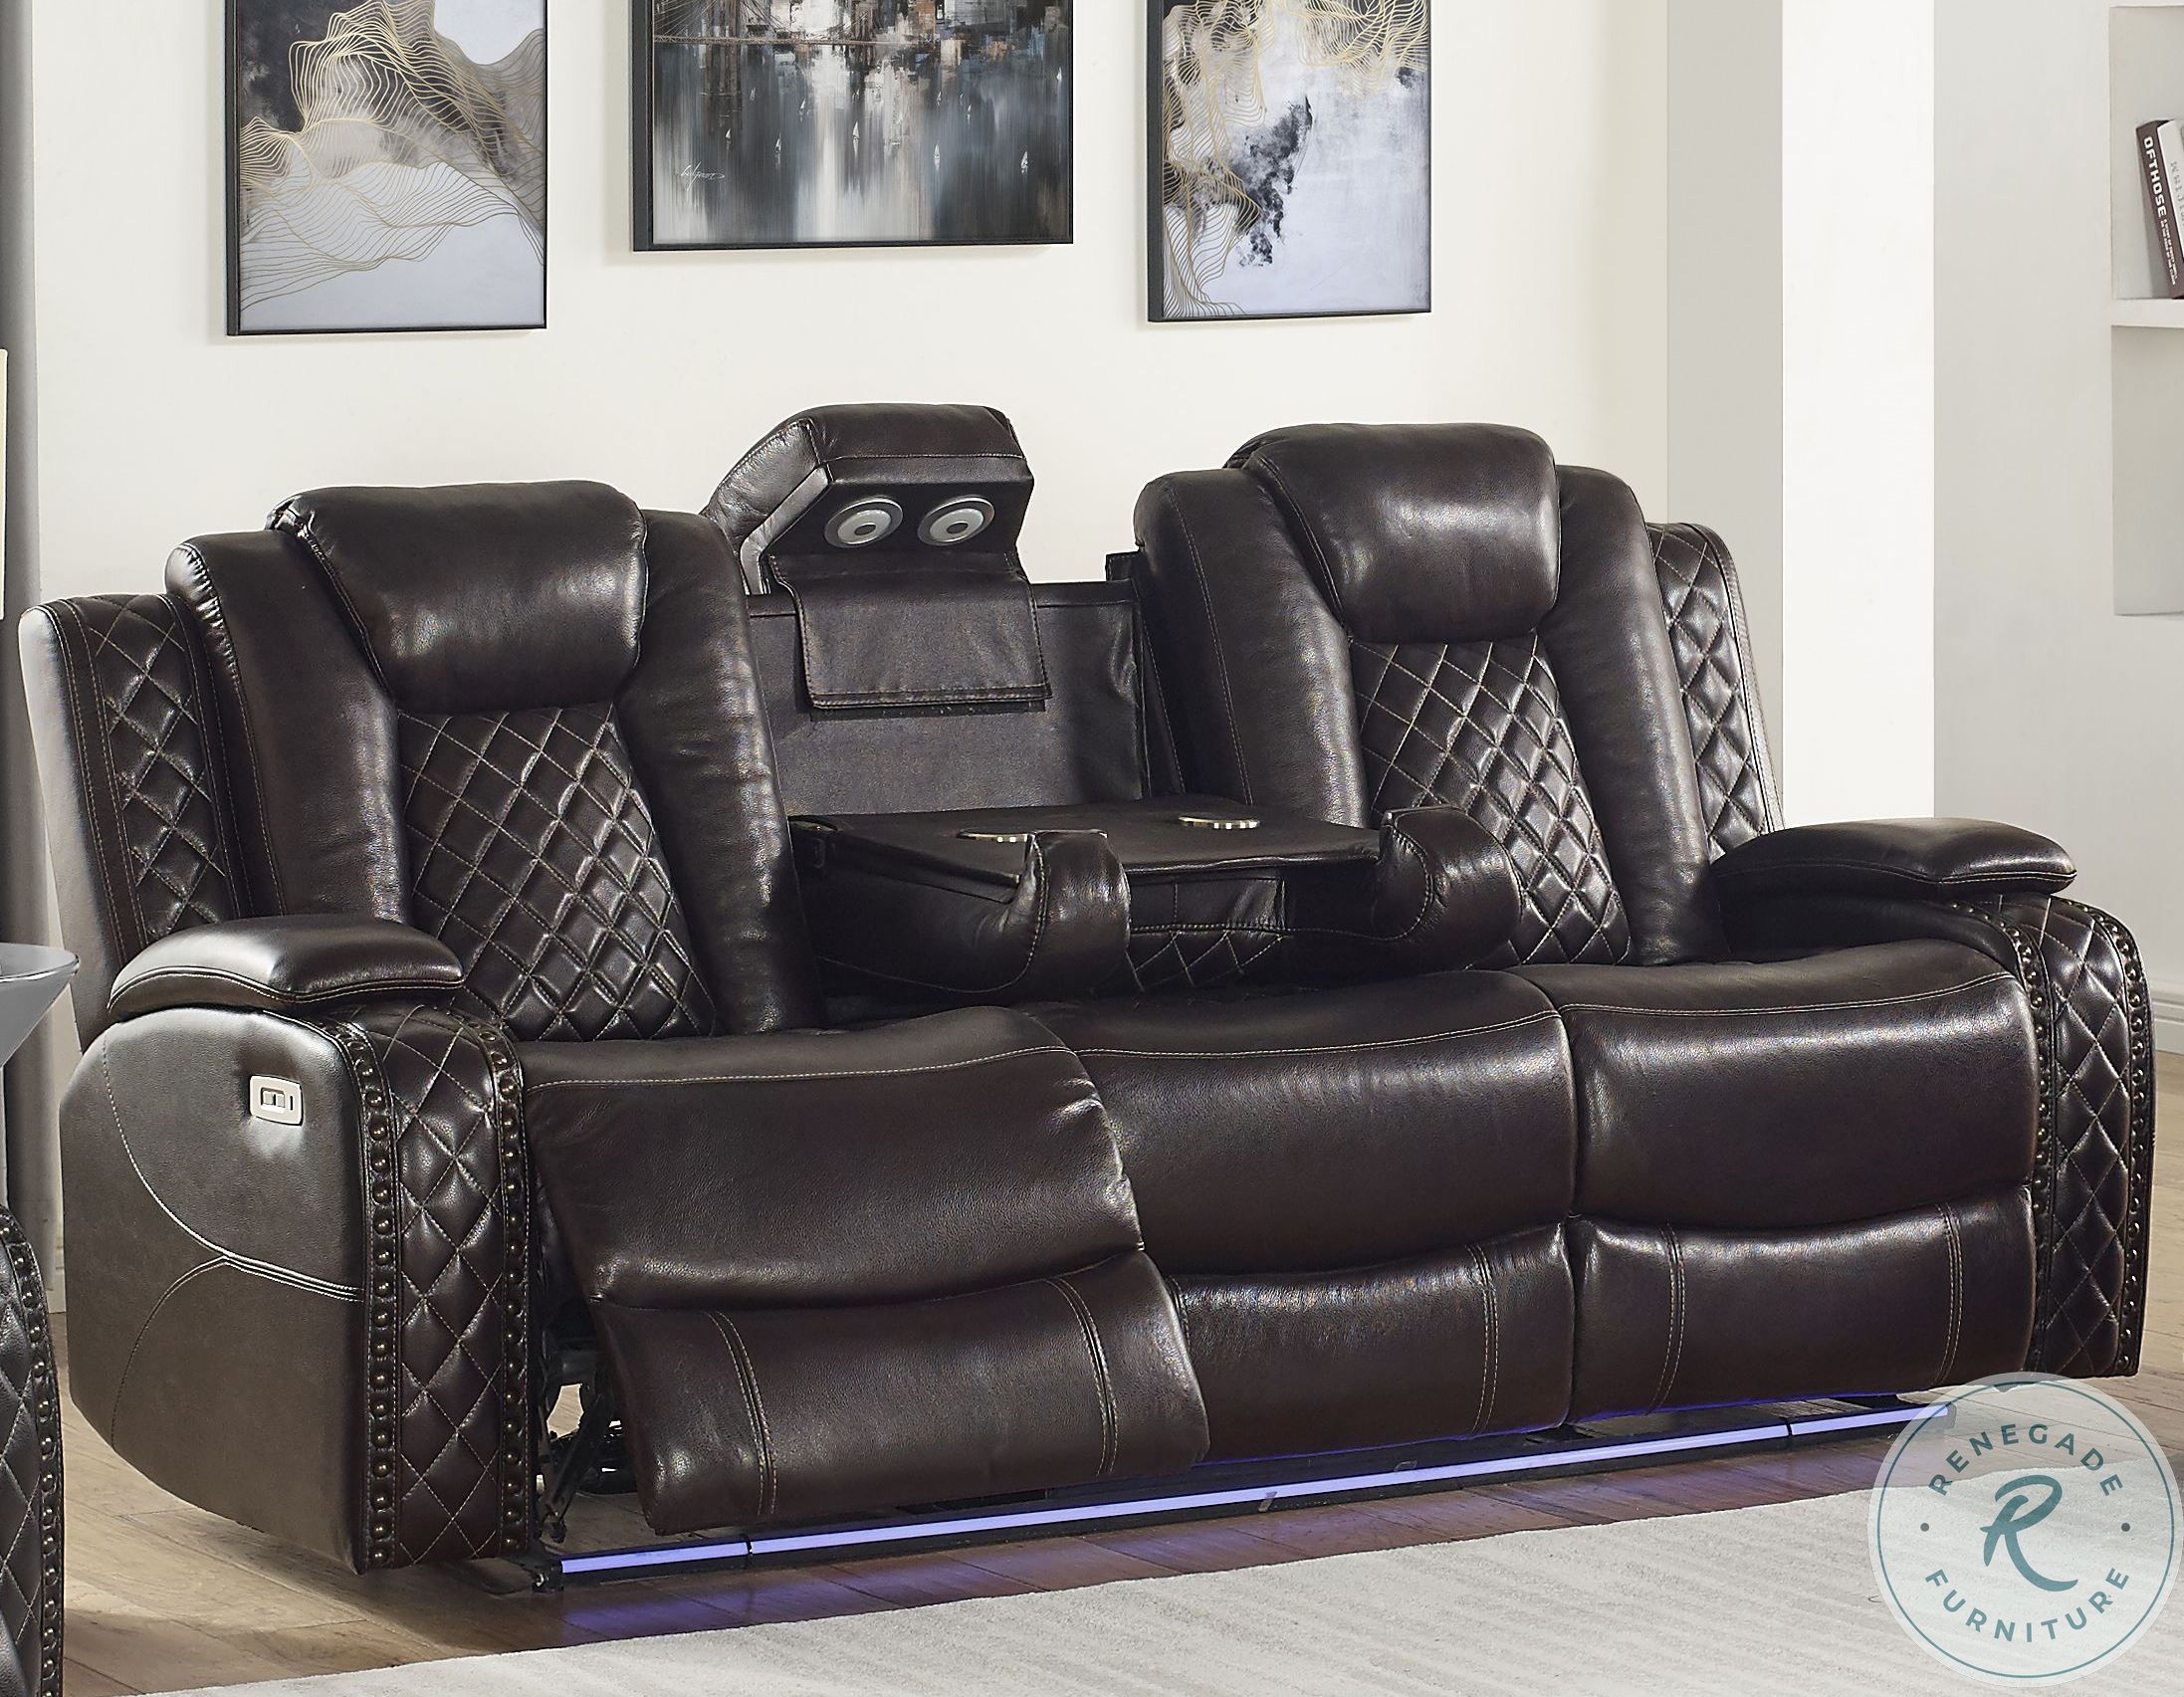 Joshua Dark Brown Leather Power Reclining Living Room Set With Power Headrest and Footrest